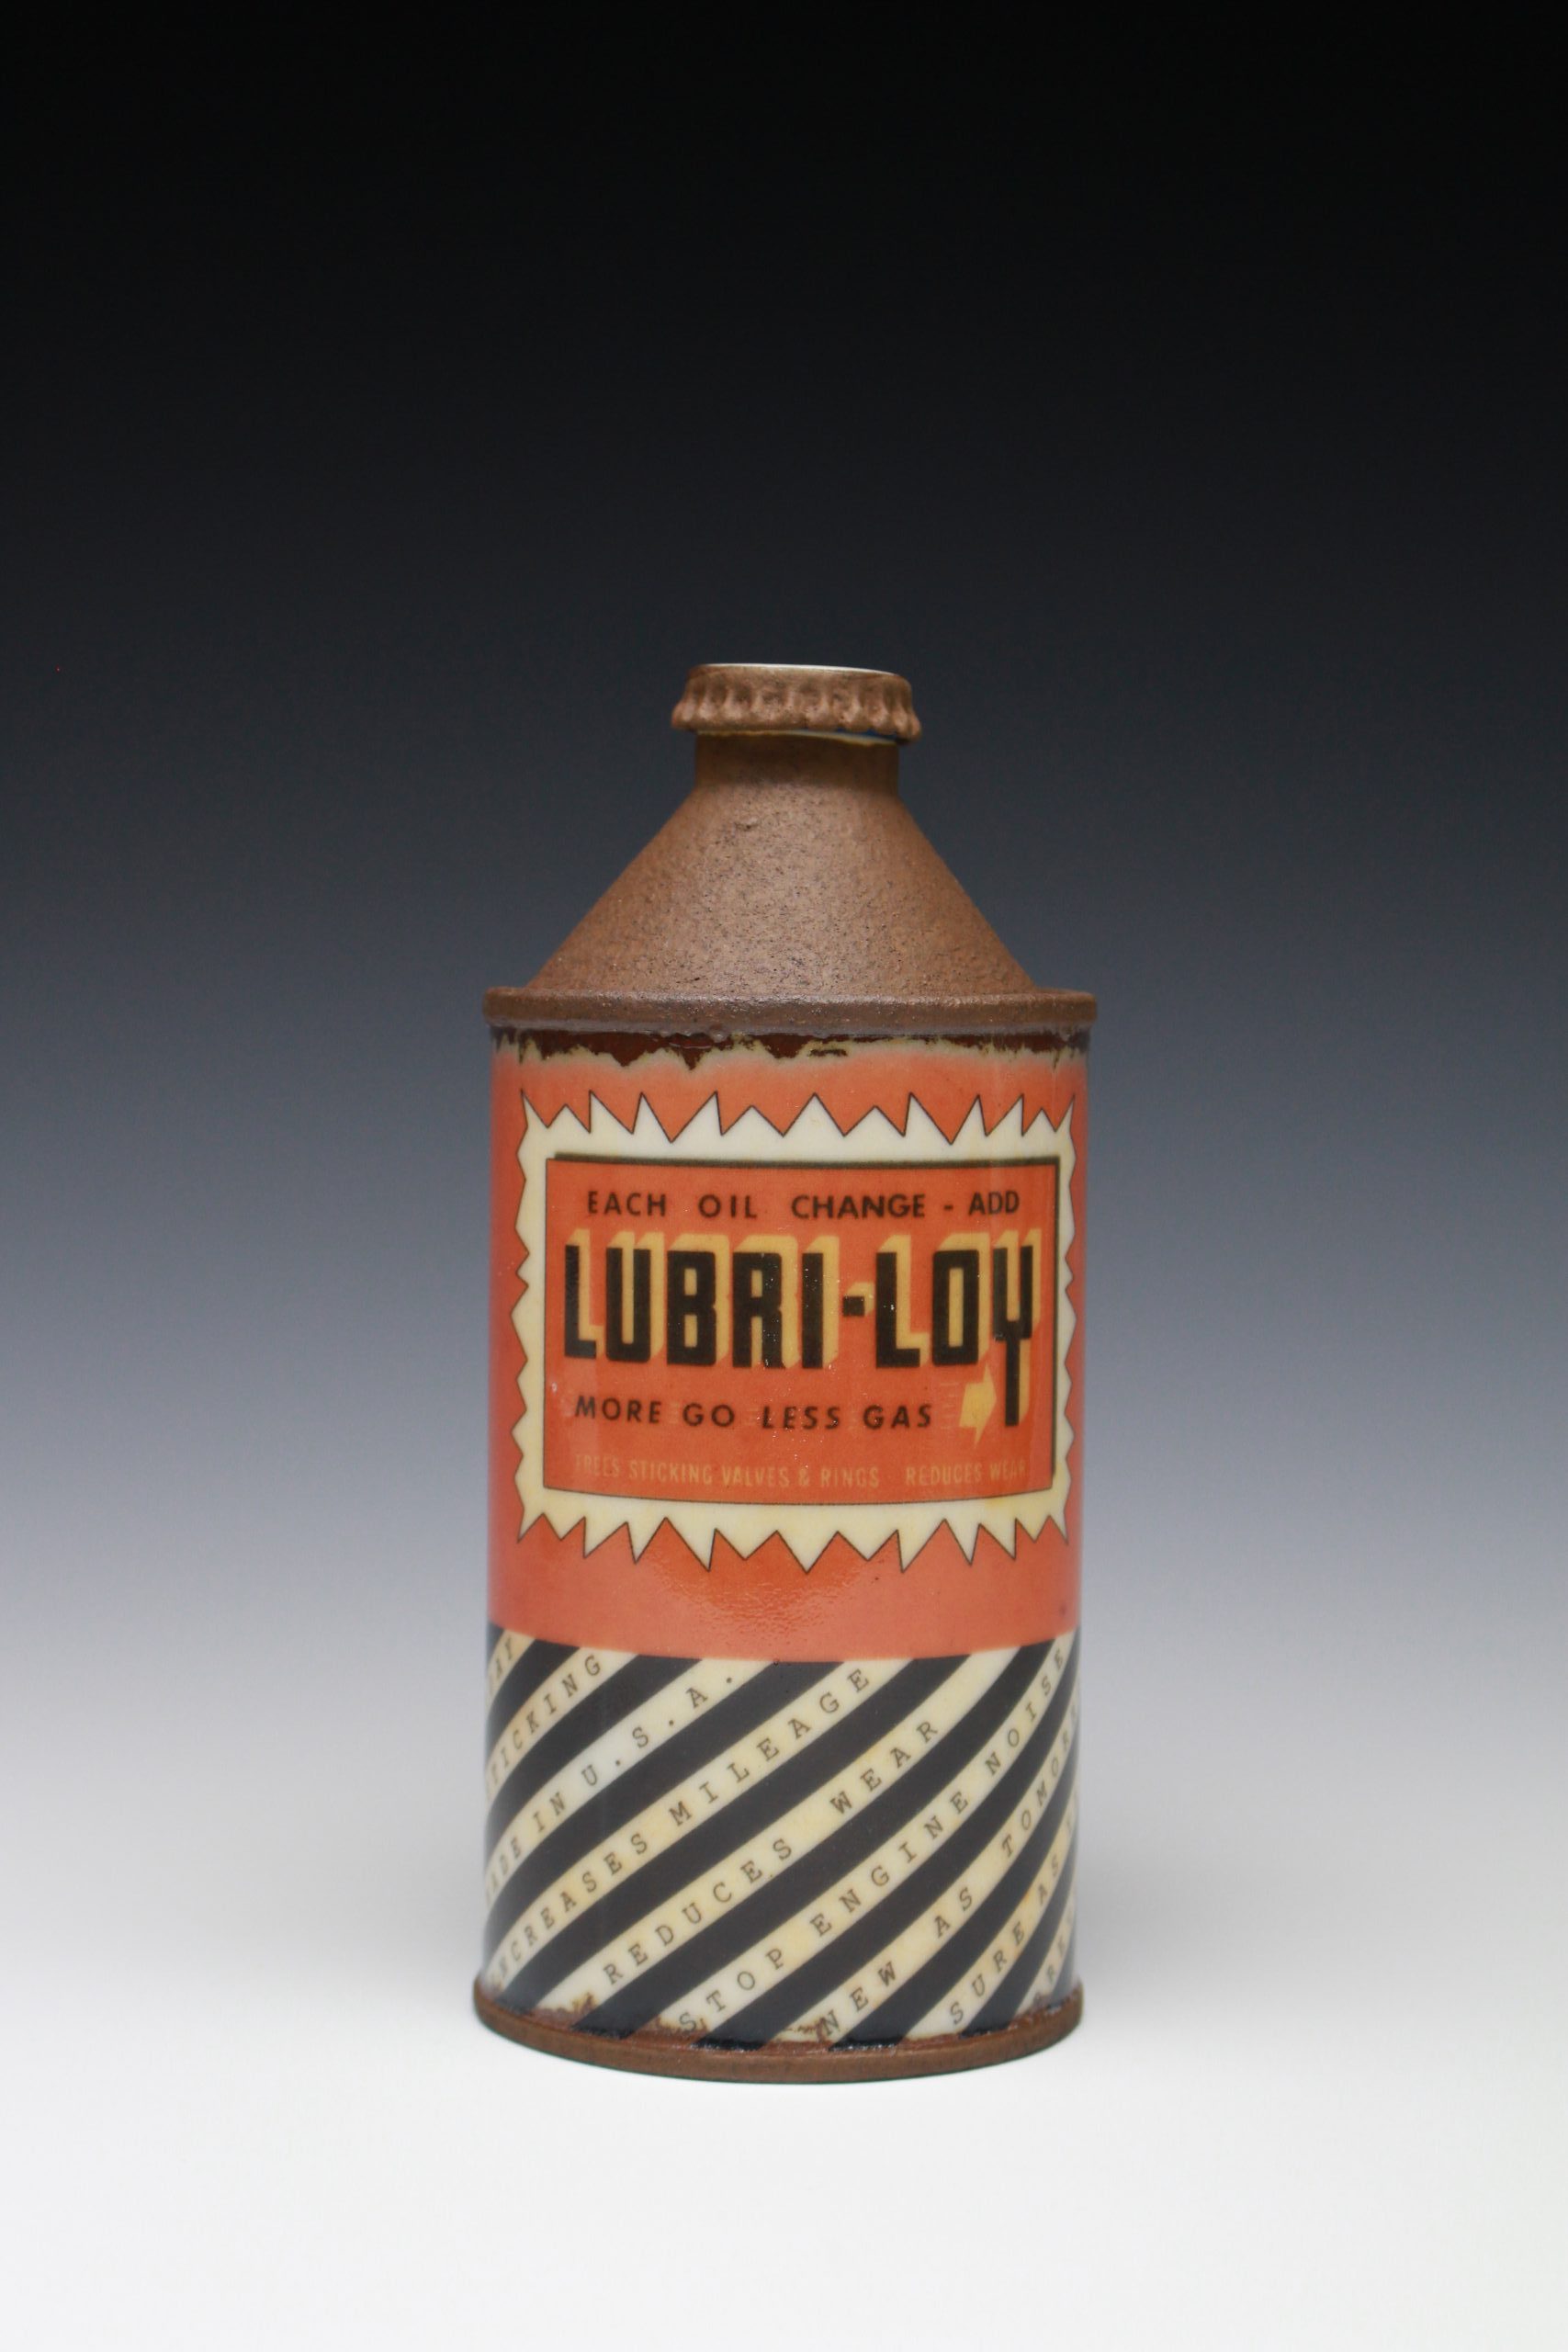 Mitchell Spain, Lubri-Loy Cone-Top Bottle, 2017, porcelain and silicone, 6.25x2.875x2.875 inches, collection of the artist